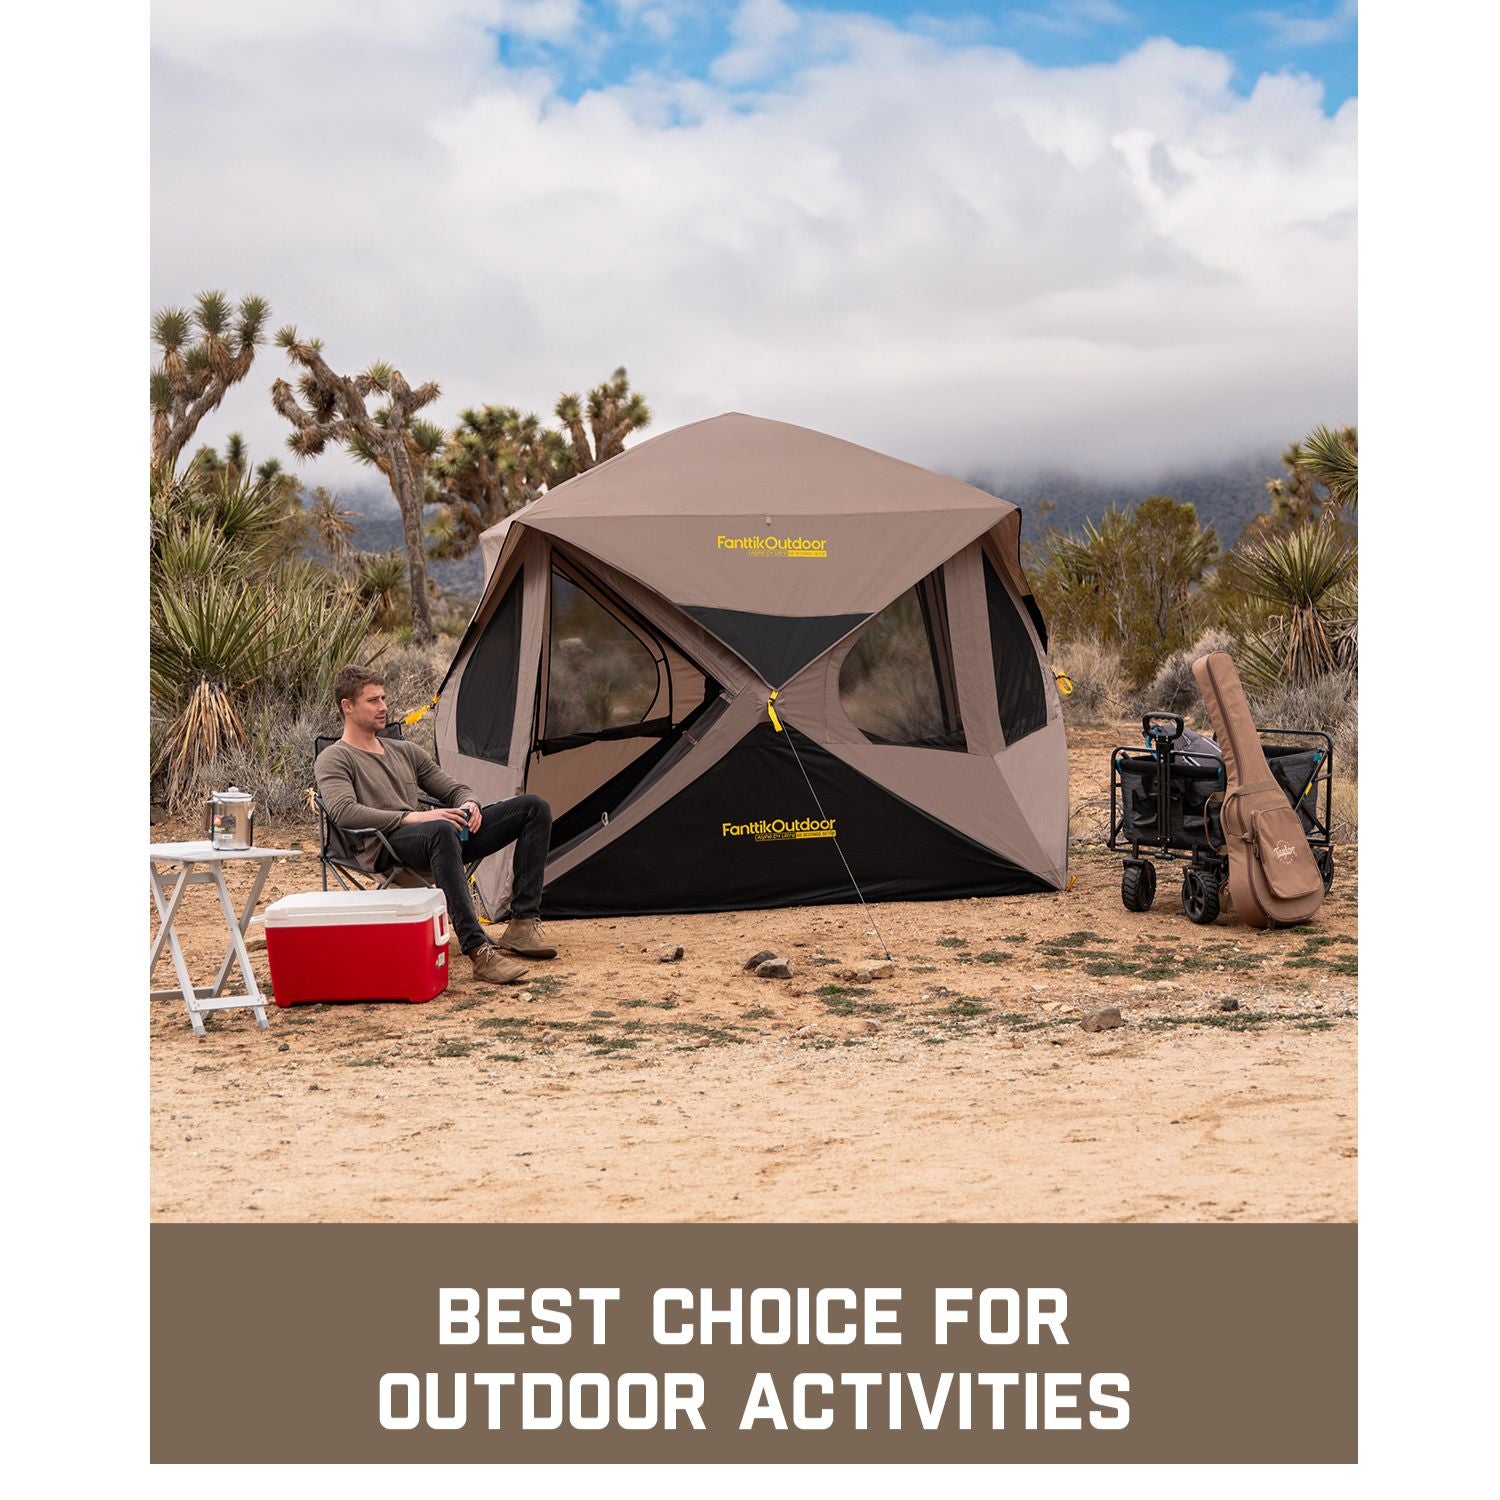 FanttikOutdoor Alpha C4 Ultra Instant Cabin Tent set up in a desert landscape with camping gear and a man sitting on a chair. Text reads 'Best choice for outdoor activities'.